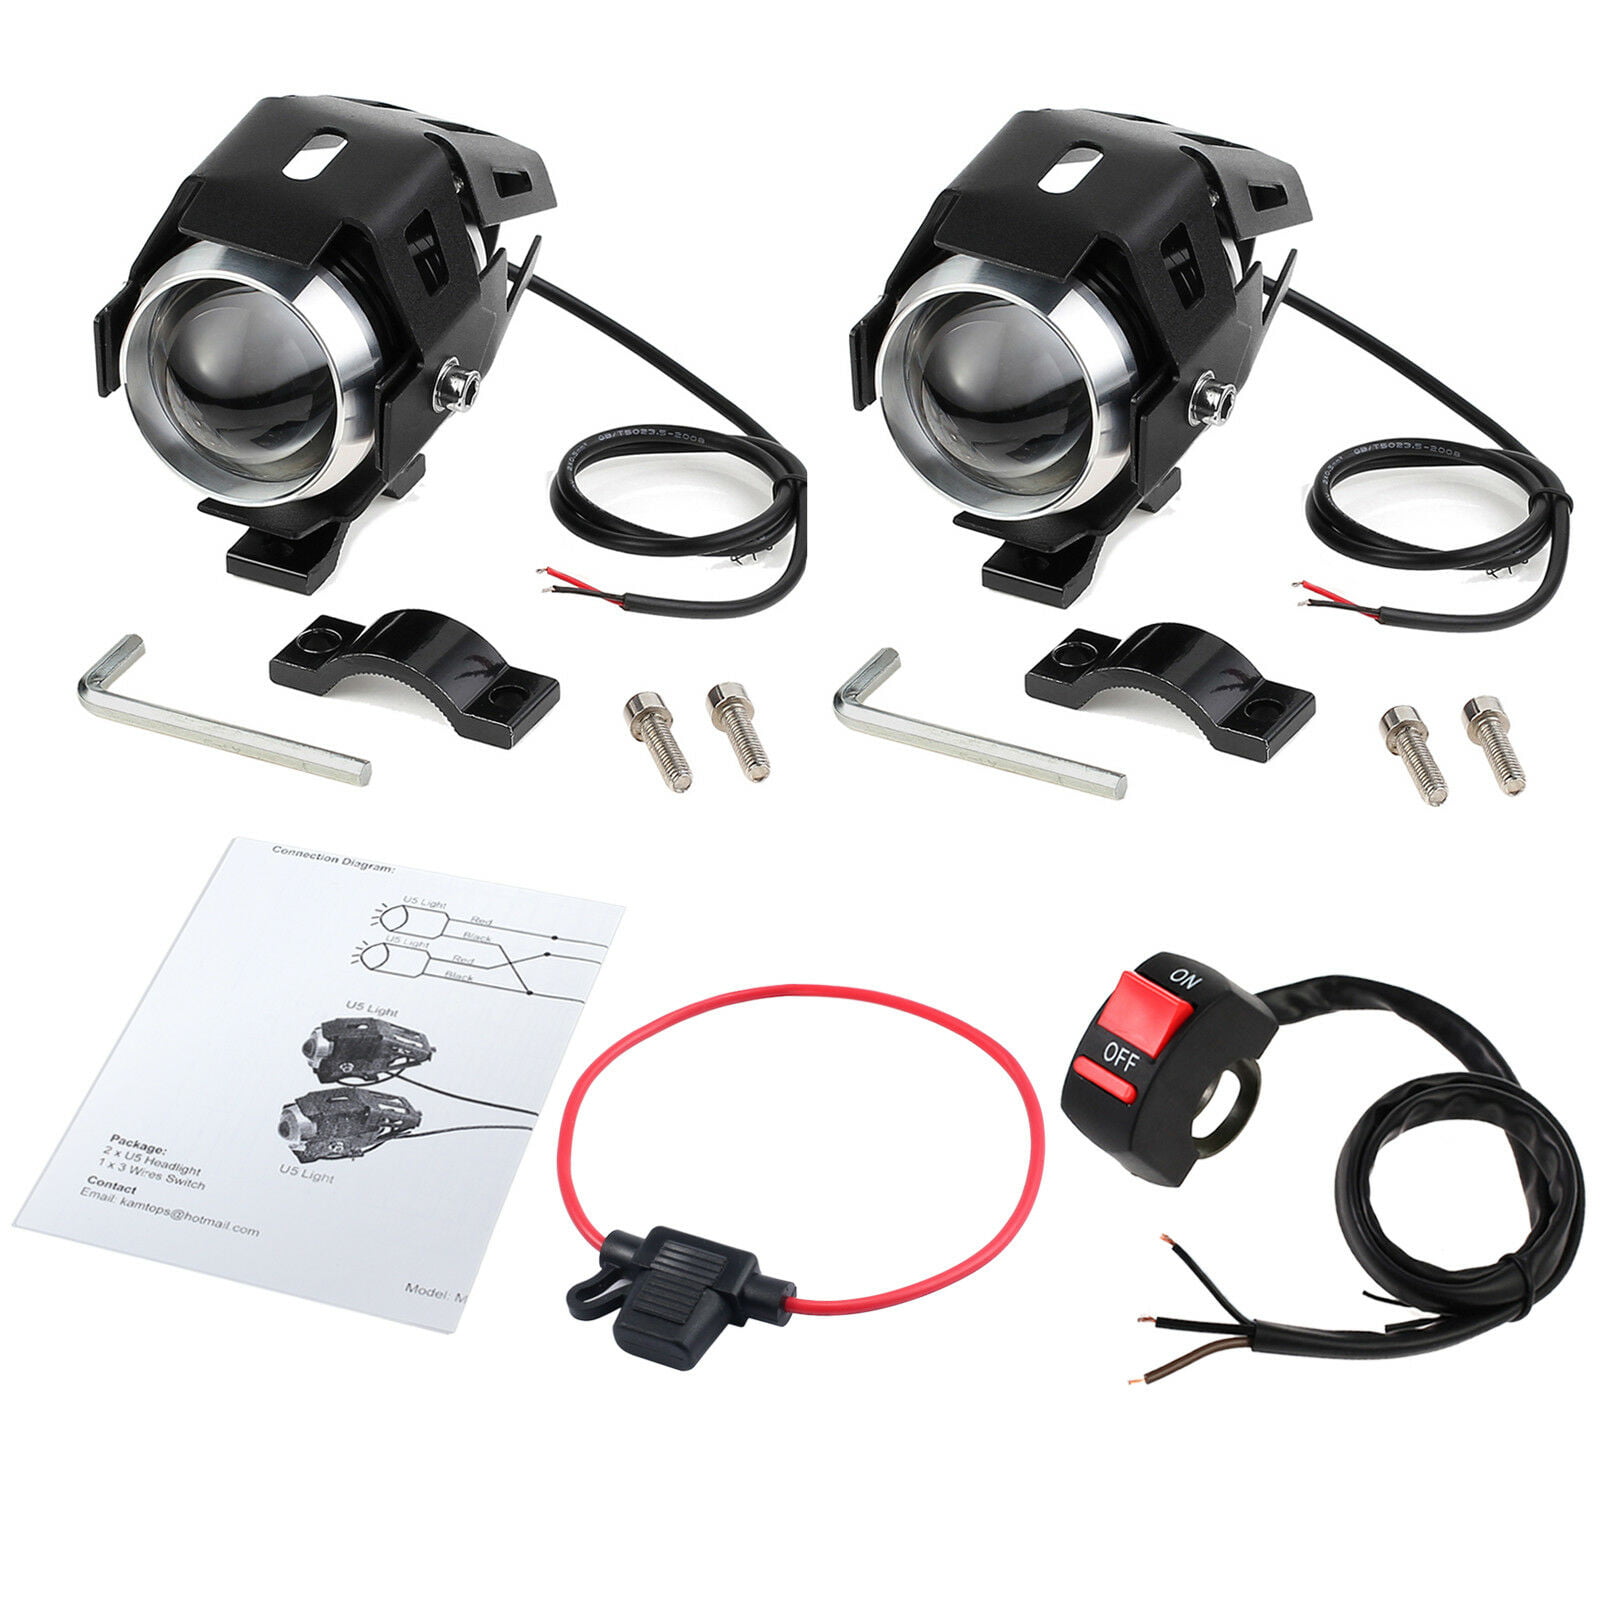 YGGFA 2pcs Motorcycle LED Headlight 125W 3000LM U5 Waterproof Driving Spot Head Lamp Fog Light Switch Motorcycle Accessories Bulbs Color : 1 Black and 1 Silve 